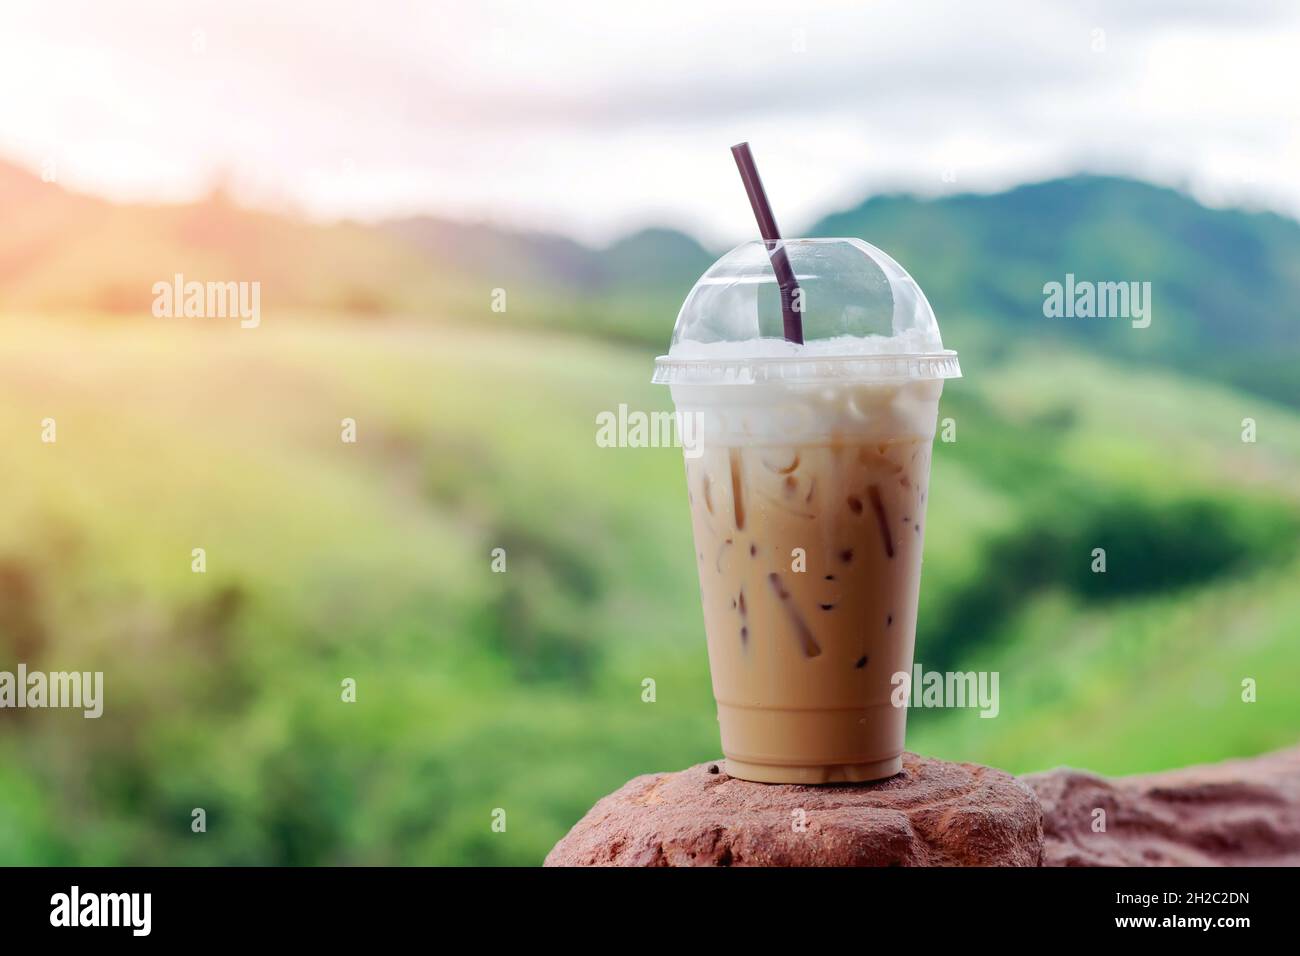 https://c8.alamy.com/comp/2H2C2DN/closeup-ice-coffee-in-plastic-cup-with-beautiful-mountain-background-2H2C2DN.jpg